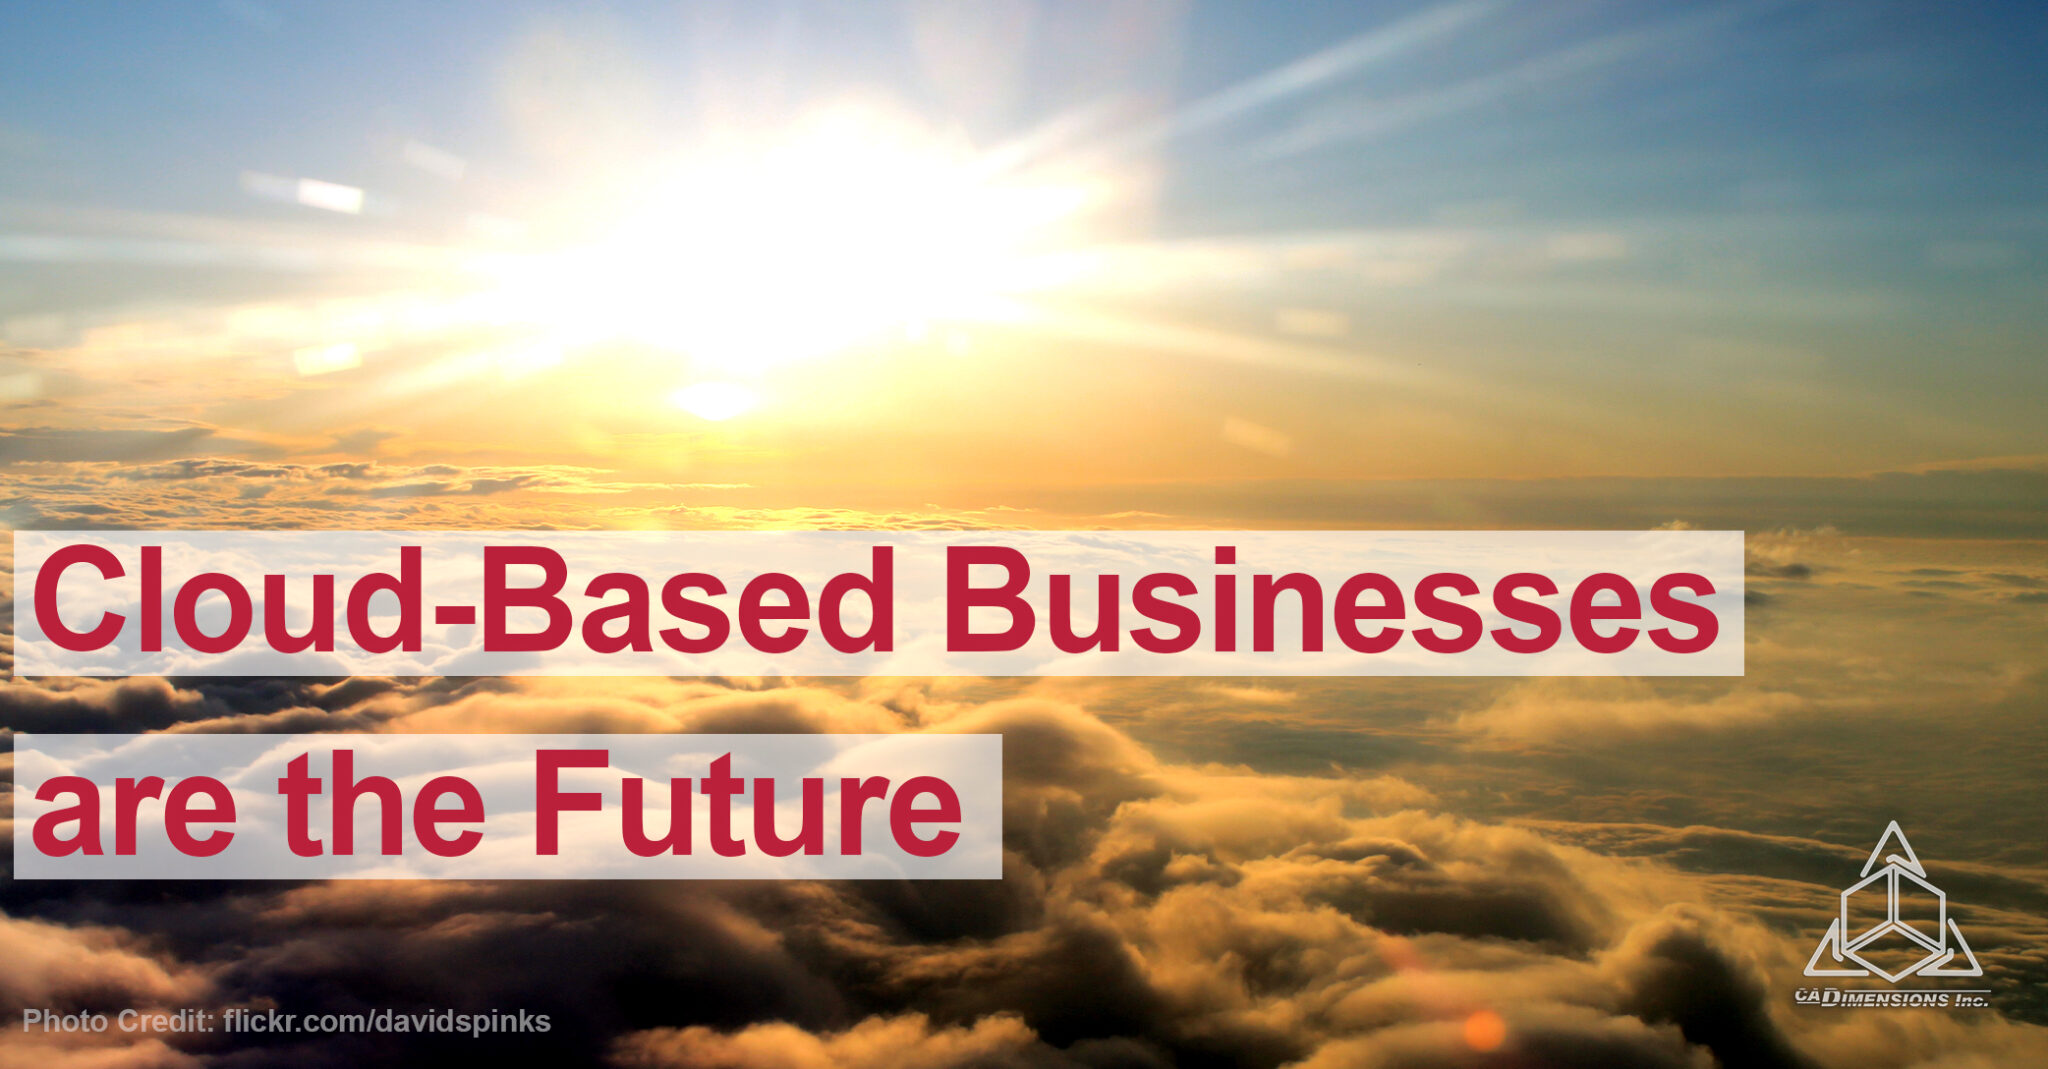 Top 5 Reasons Cloud-Based Businesses are the Future